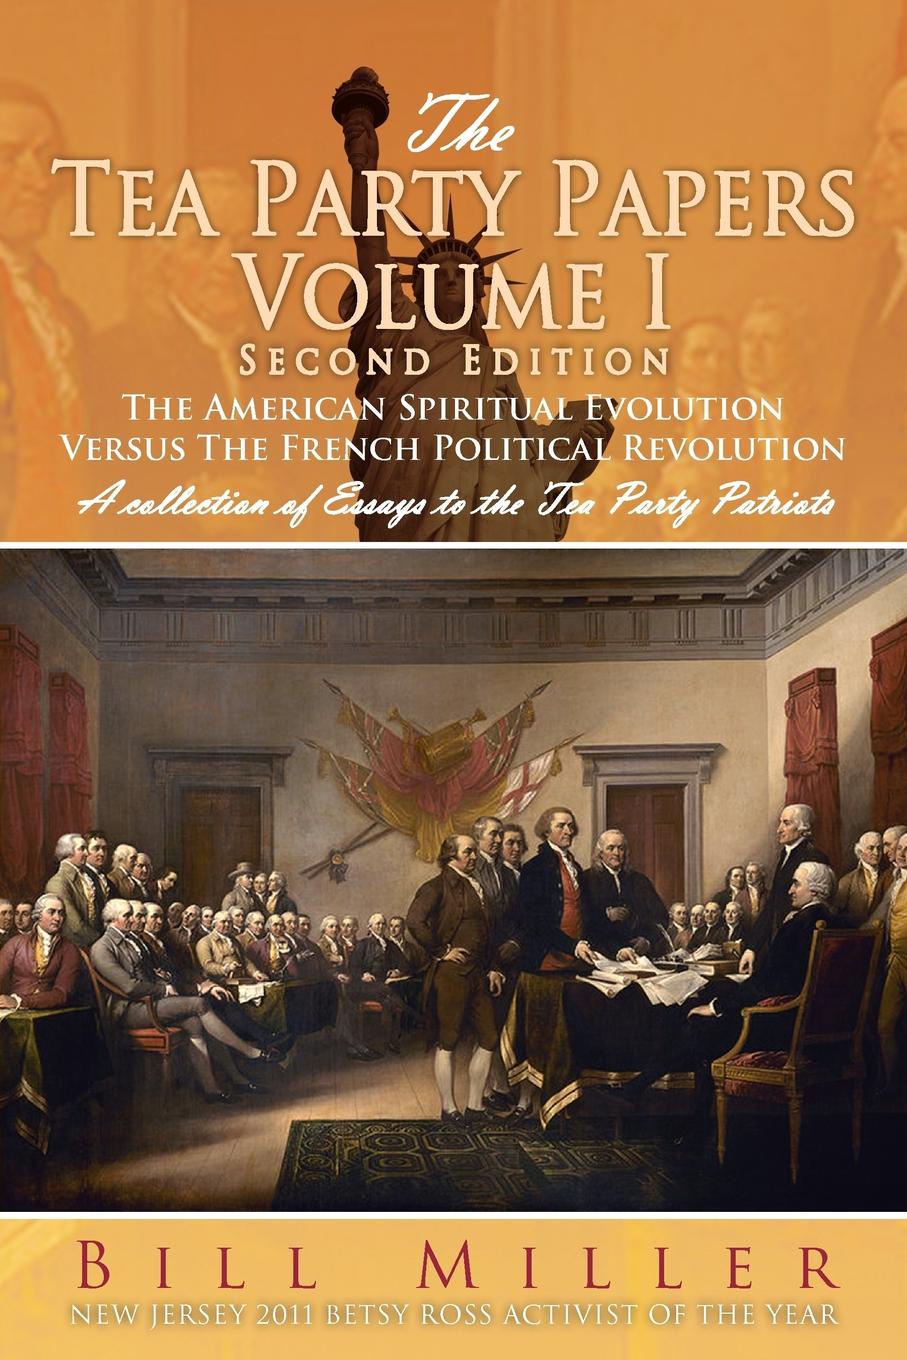 The Tea Party Papers Volume I Second Edition. The American Spiritual Evolution Versus the French Political Revolution